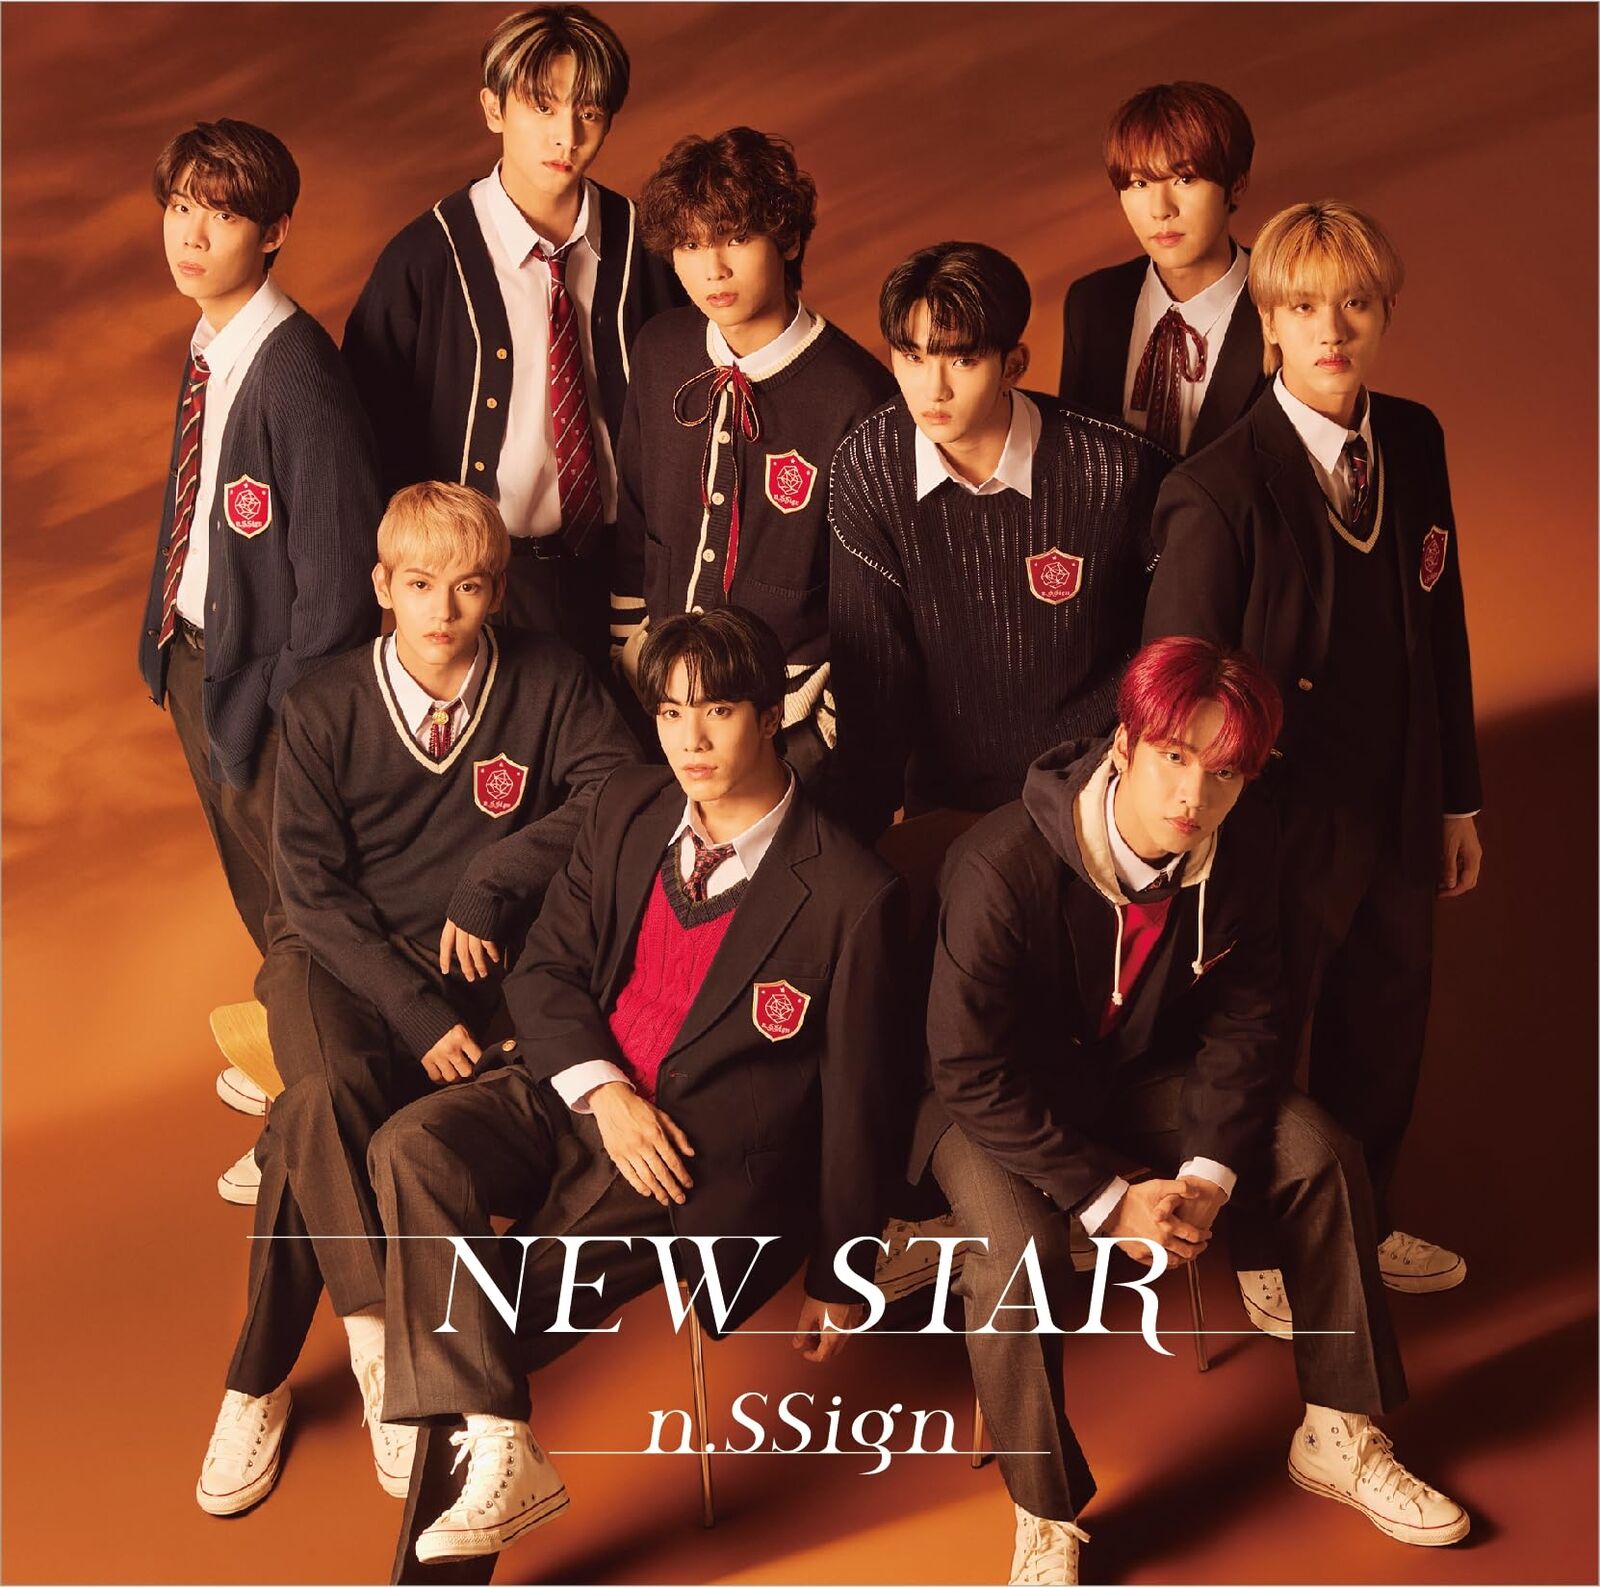 N.ssign New Star - Version A - incl. DVD. (CD)